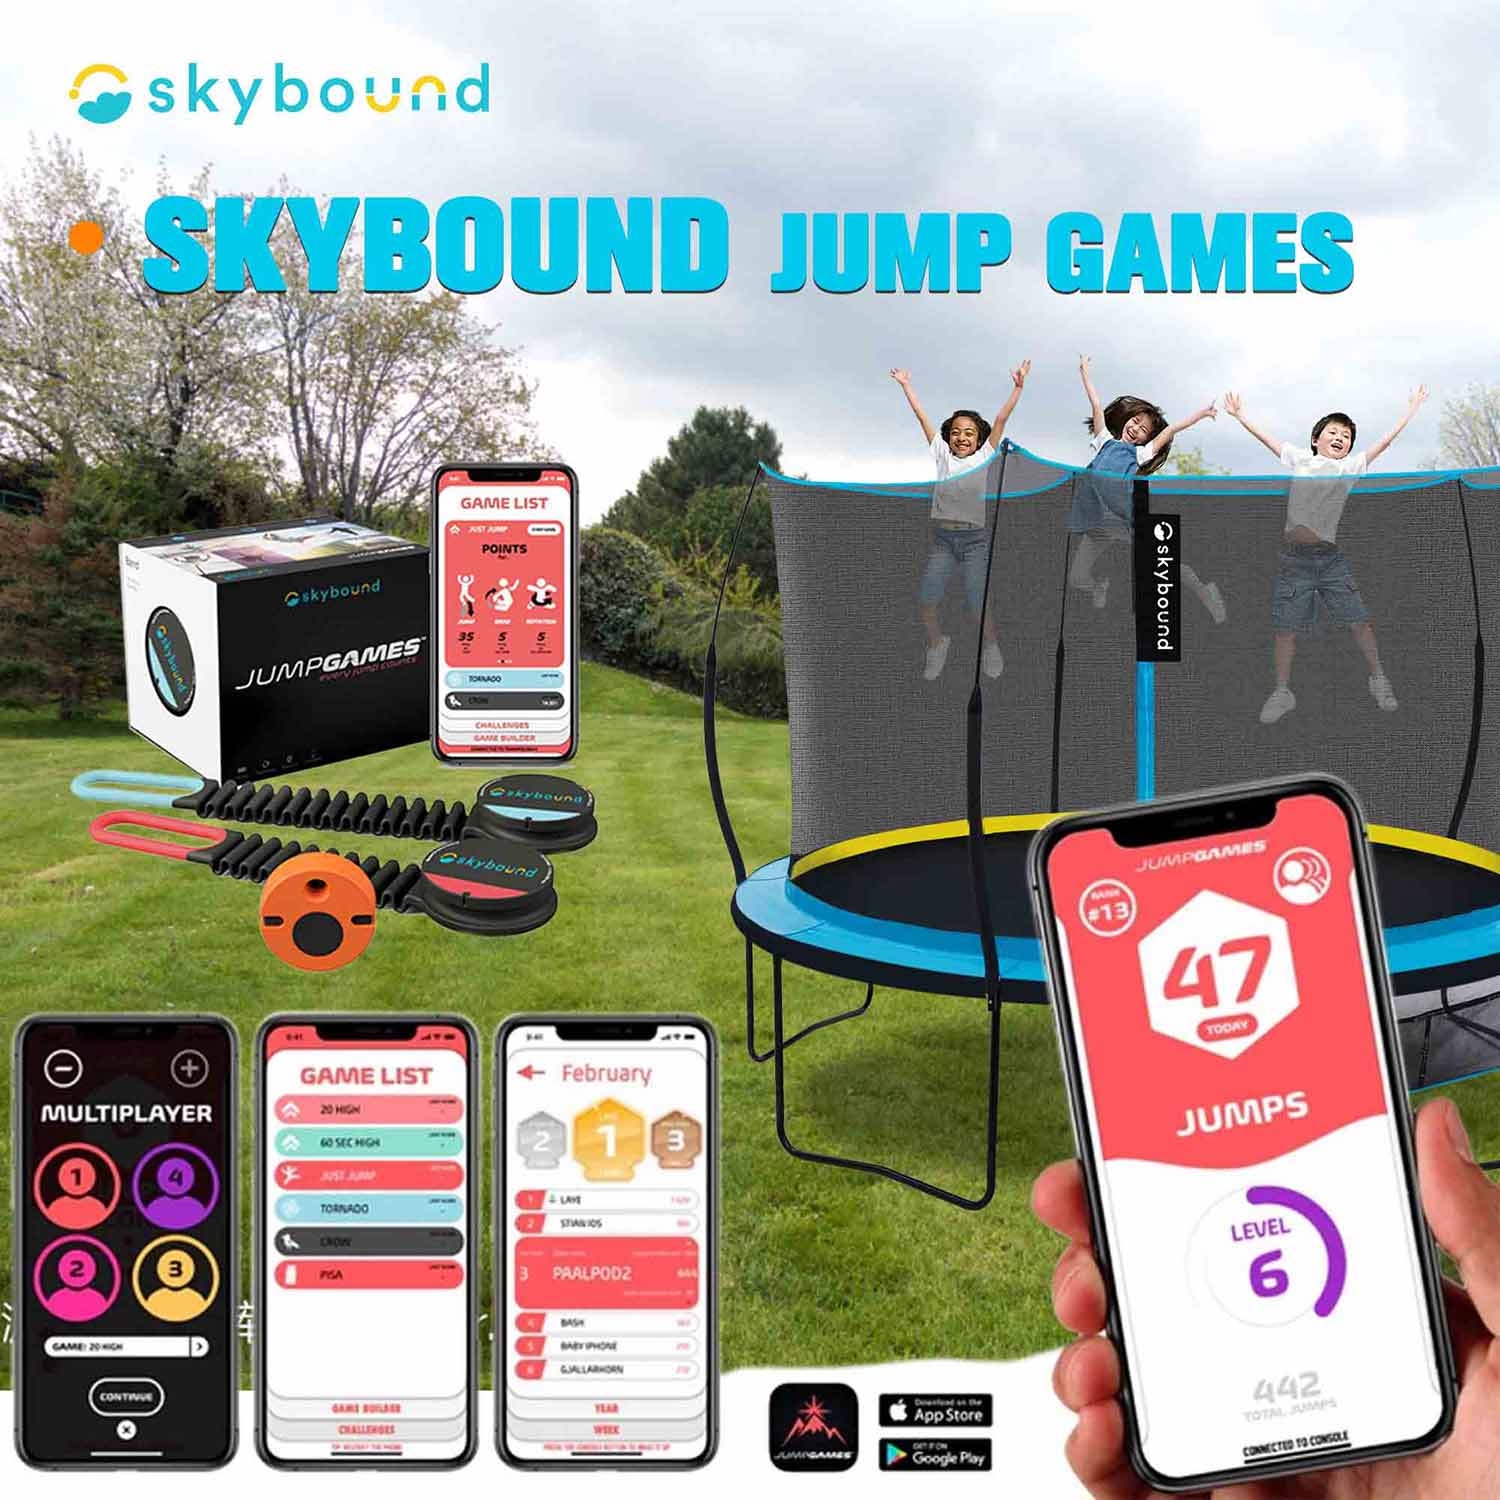 Title: SKYBOUND JUMP GAMES Description: On the left, there is an electronic wristband provided with the Skylift trampoline. On the right, three children are jumping on a Skylift 10-foot trampoline. Below, there are four smartphone screens displaying the interface of the Skylift Jump Games app, along with icons supporting downloads for Android and Apple phones.